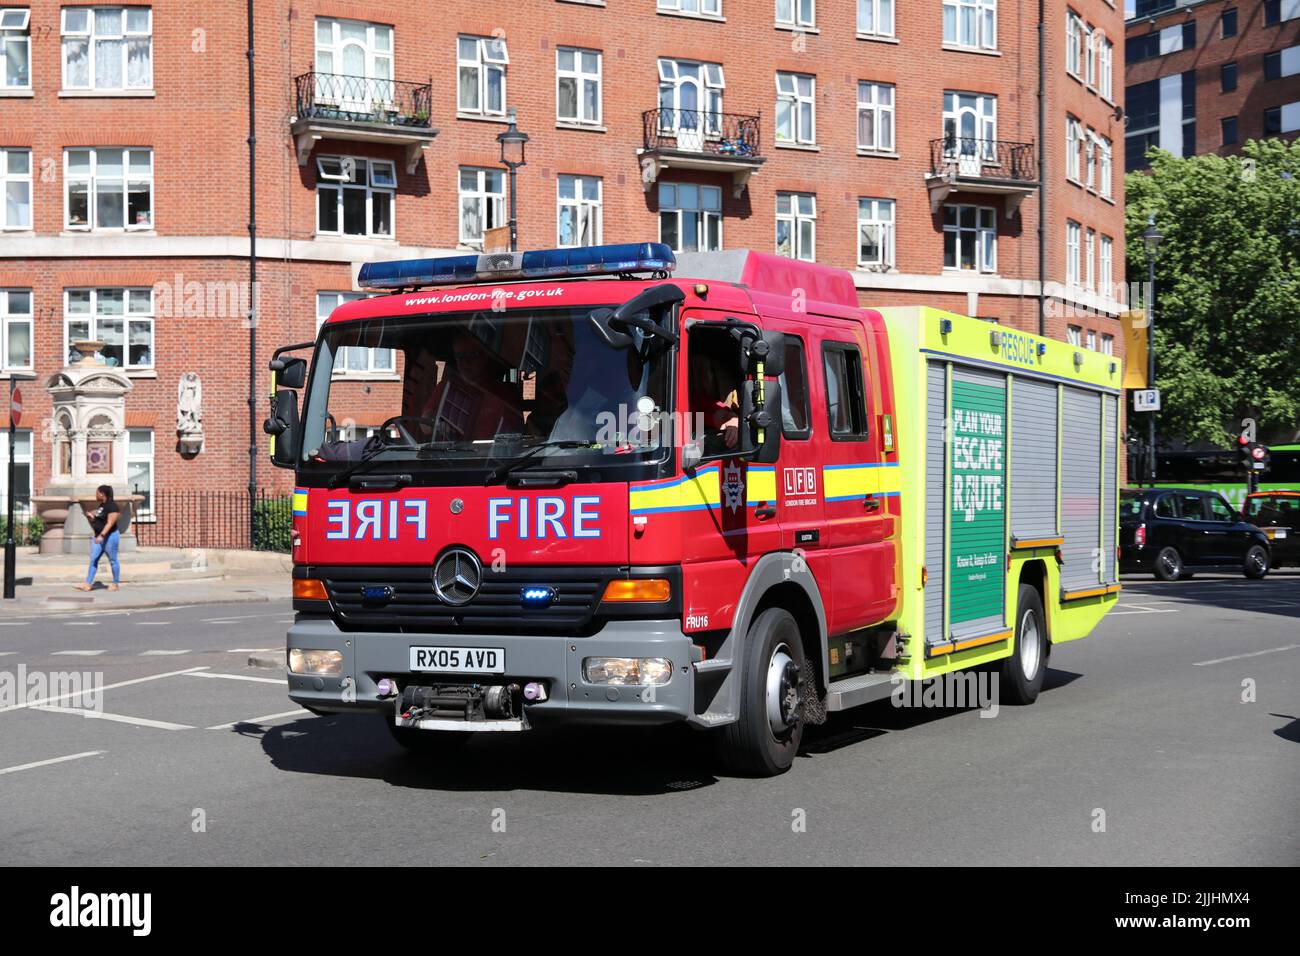 A MERCEDES-BENZ FIRE TRUCK OF LONDON FIRE BRIGADE ON A 999 EMERGENCY CALL TRAVELLING ALONG A LONDON STREET Stock Photo